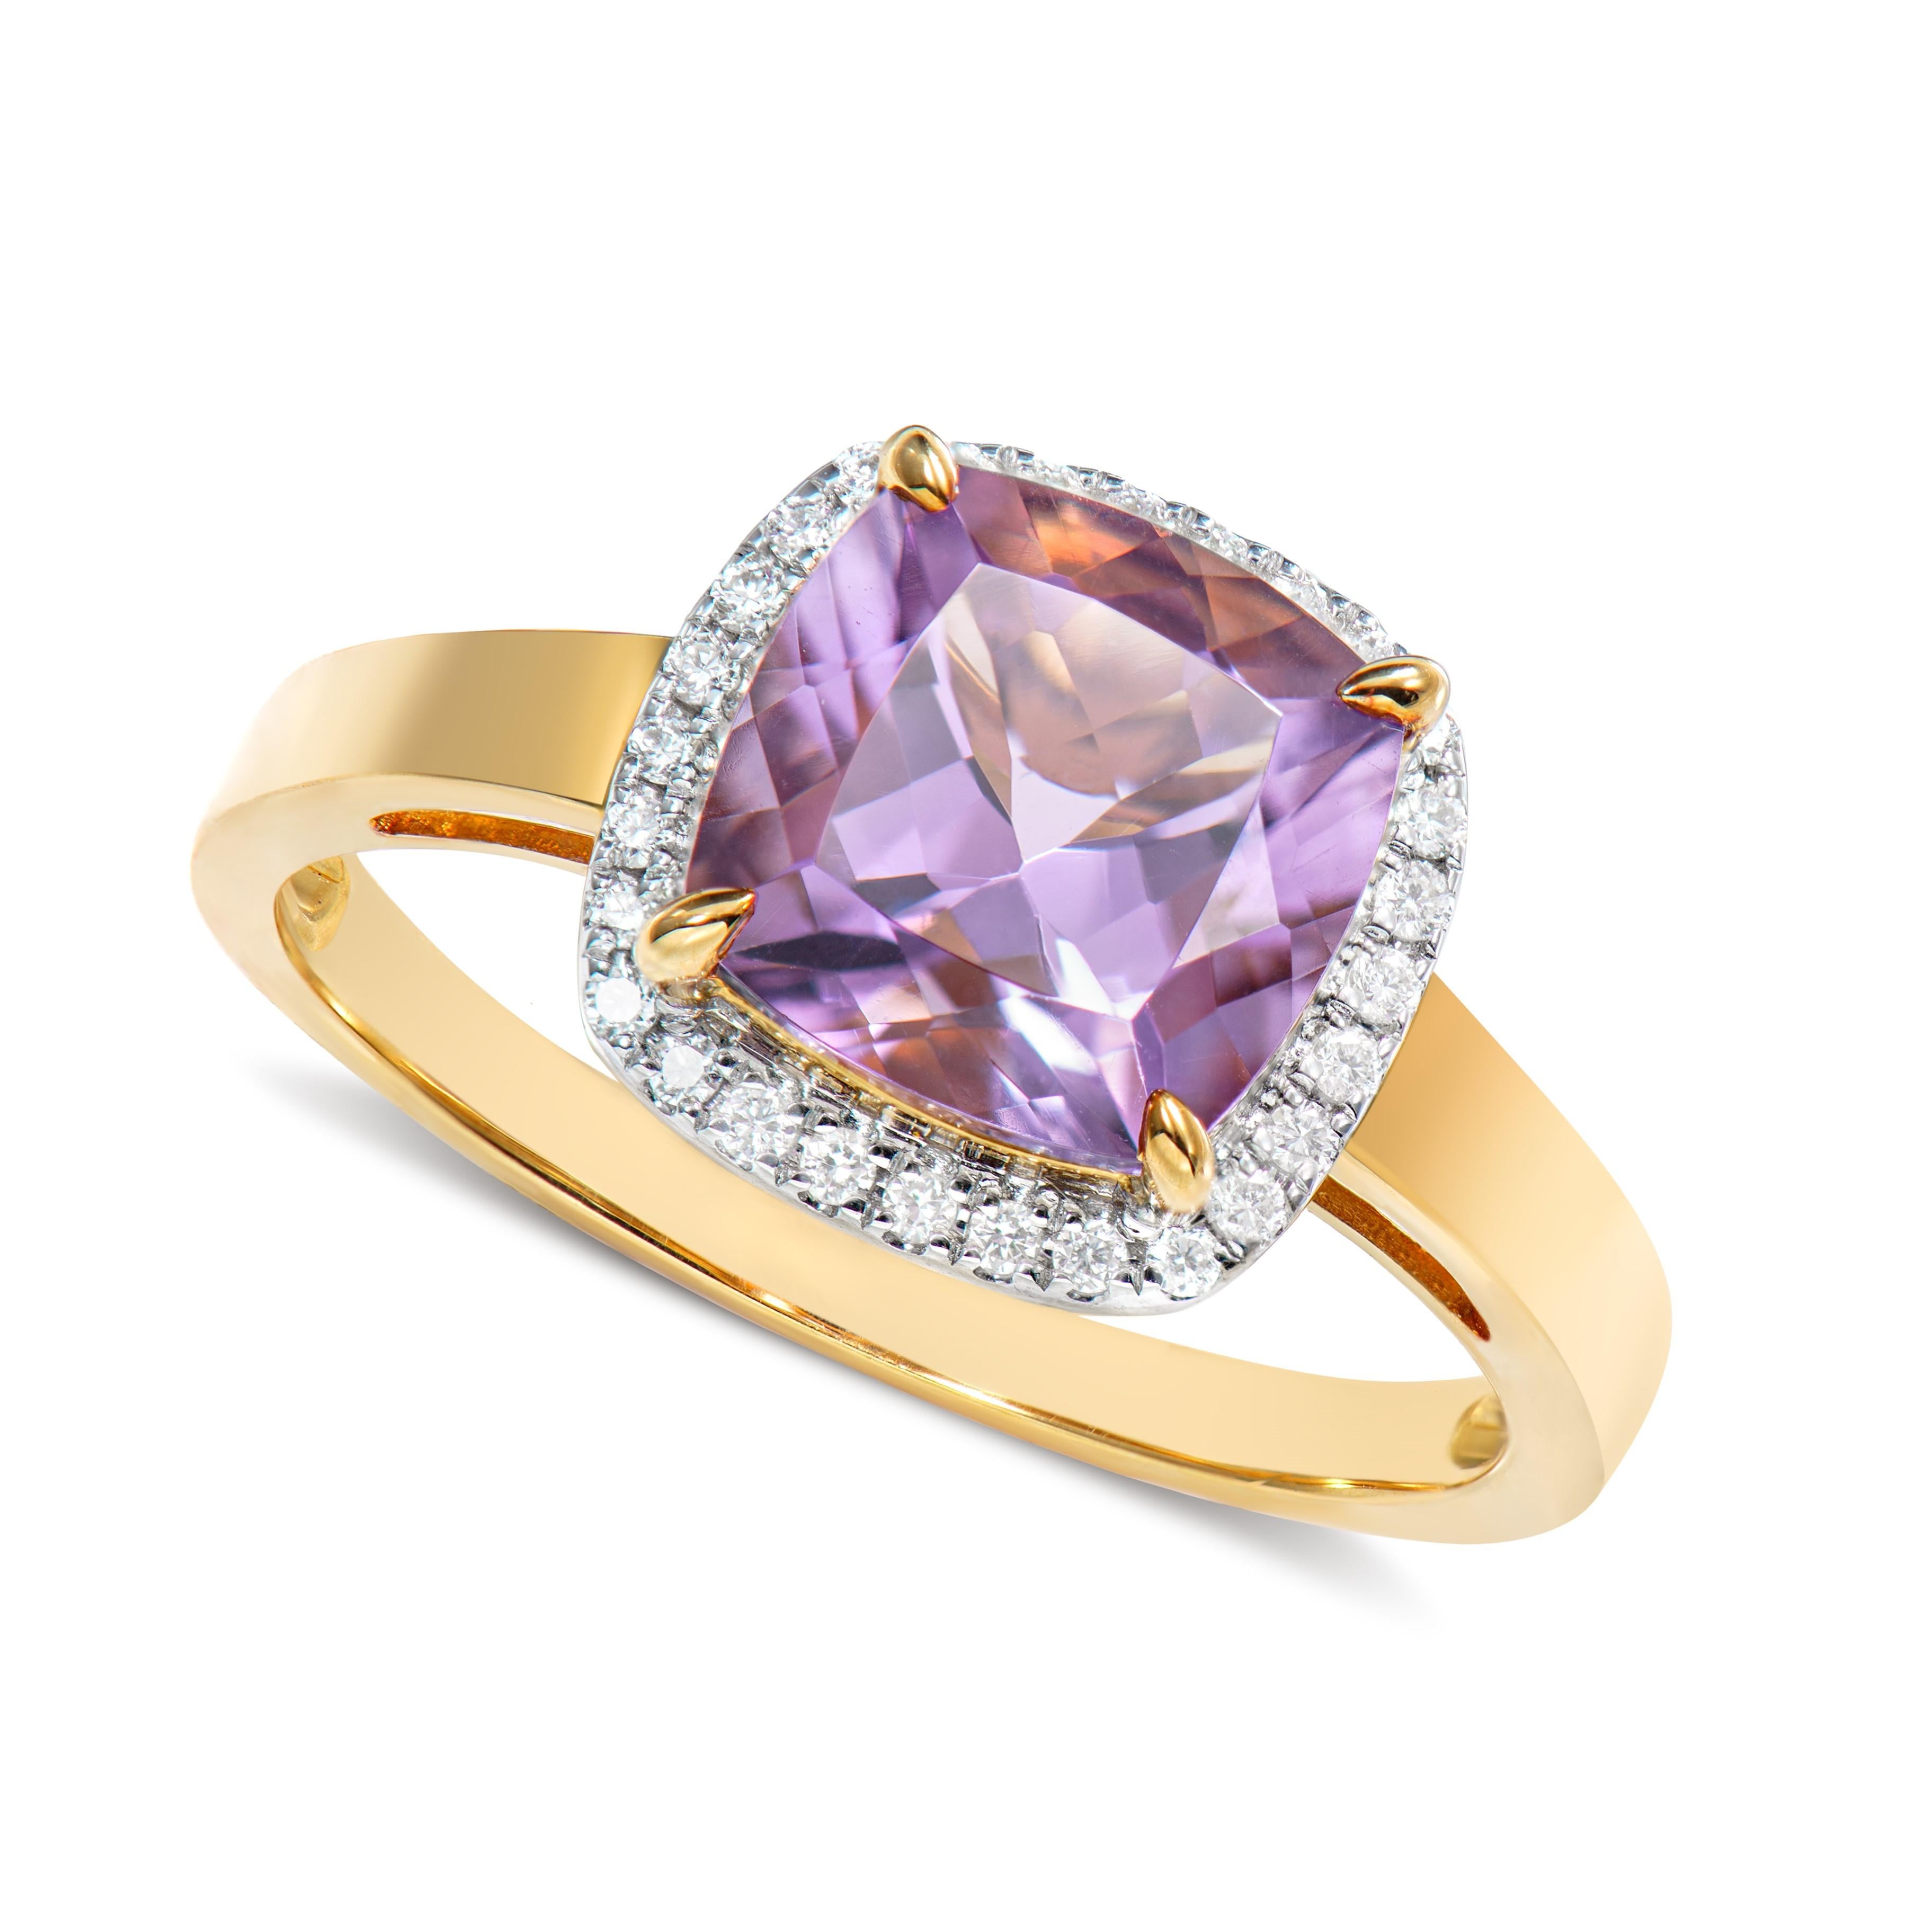 Contemporary 2.11 Carat Amethyst Fancy Ring in 18Karat Yellow Gold with White Diamond.   For Sale